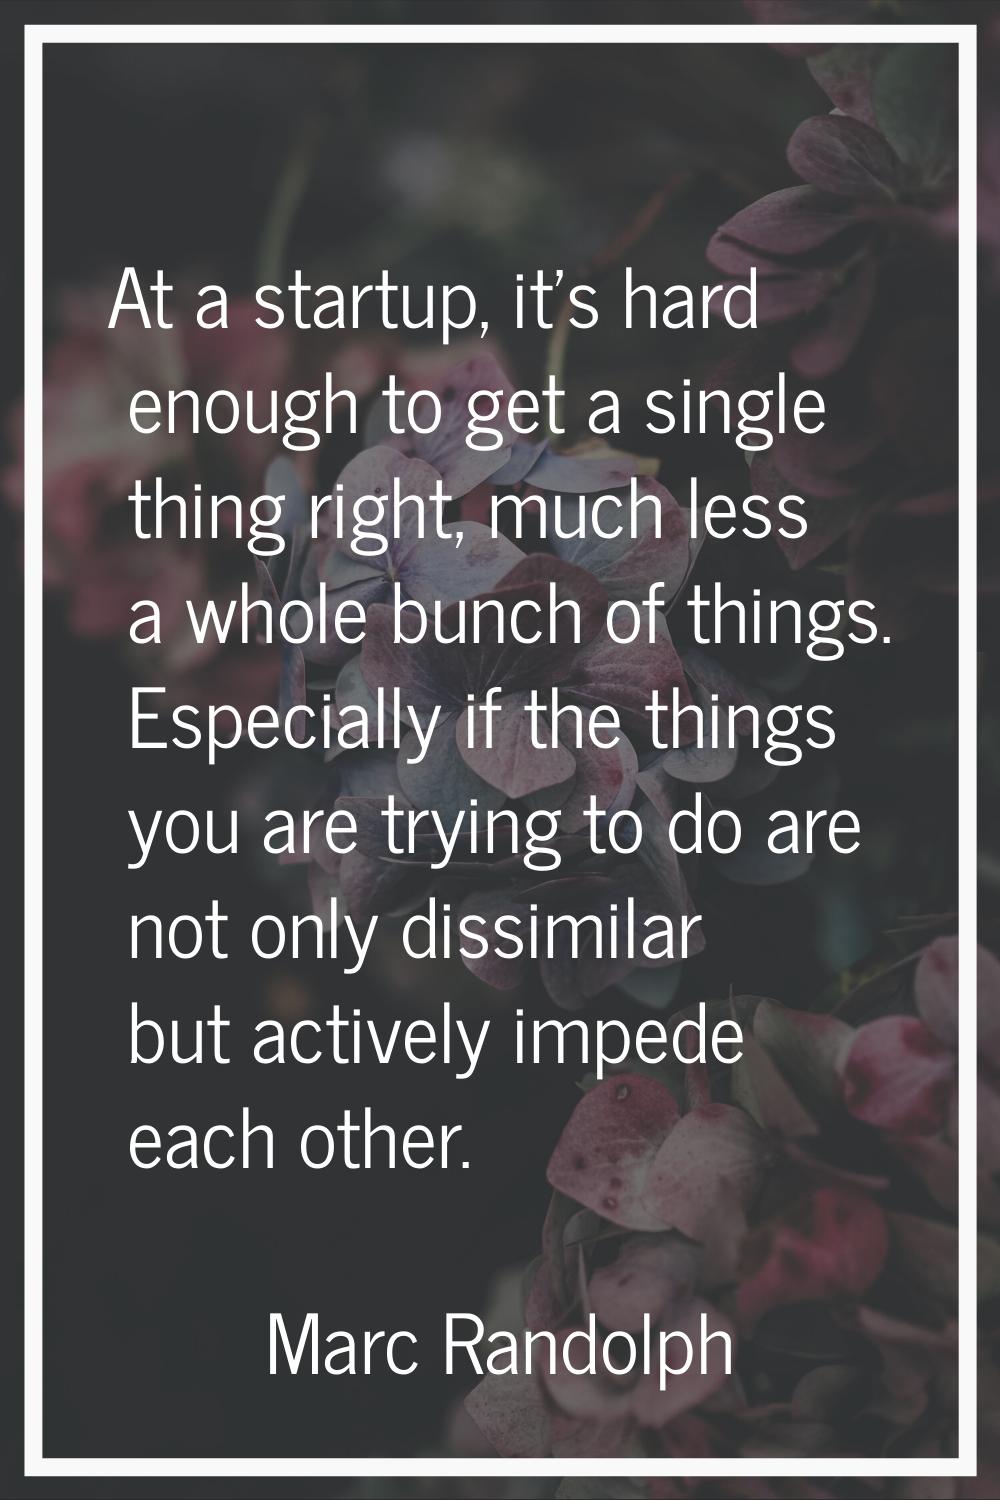 At a startup, it's hard enough to get a single thing right, much less a whole bunch of things. Espe